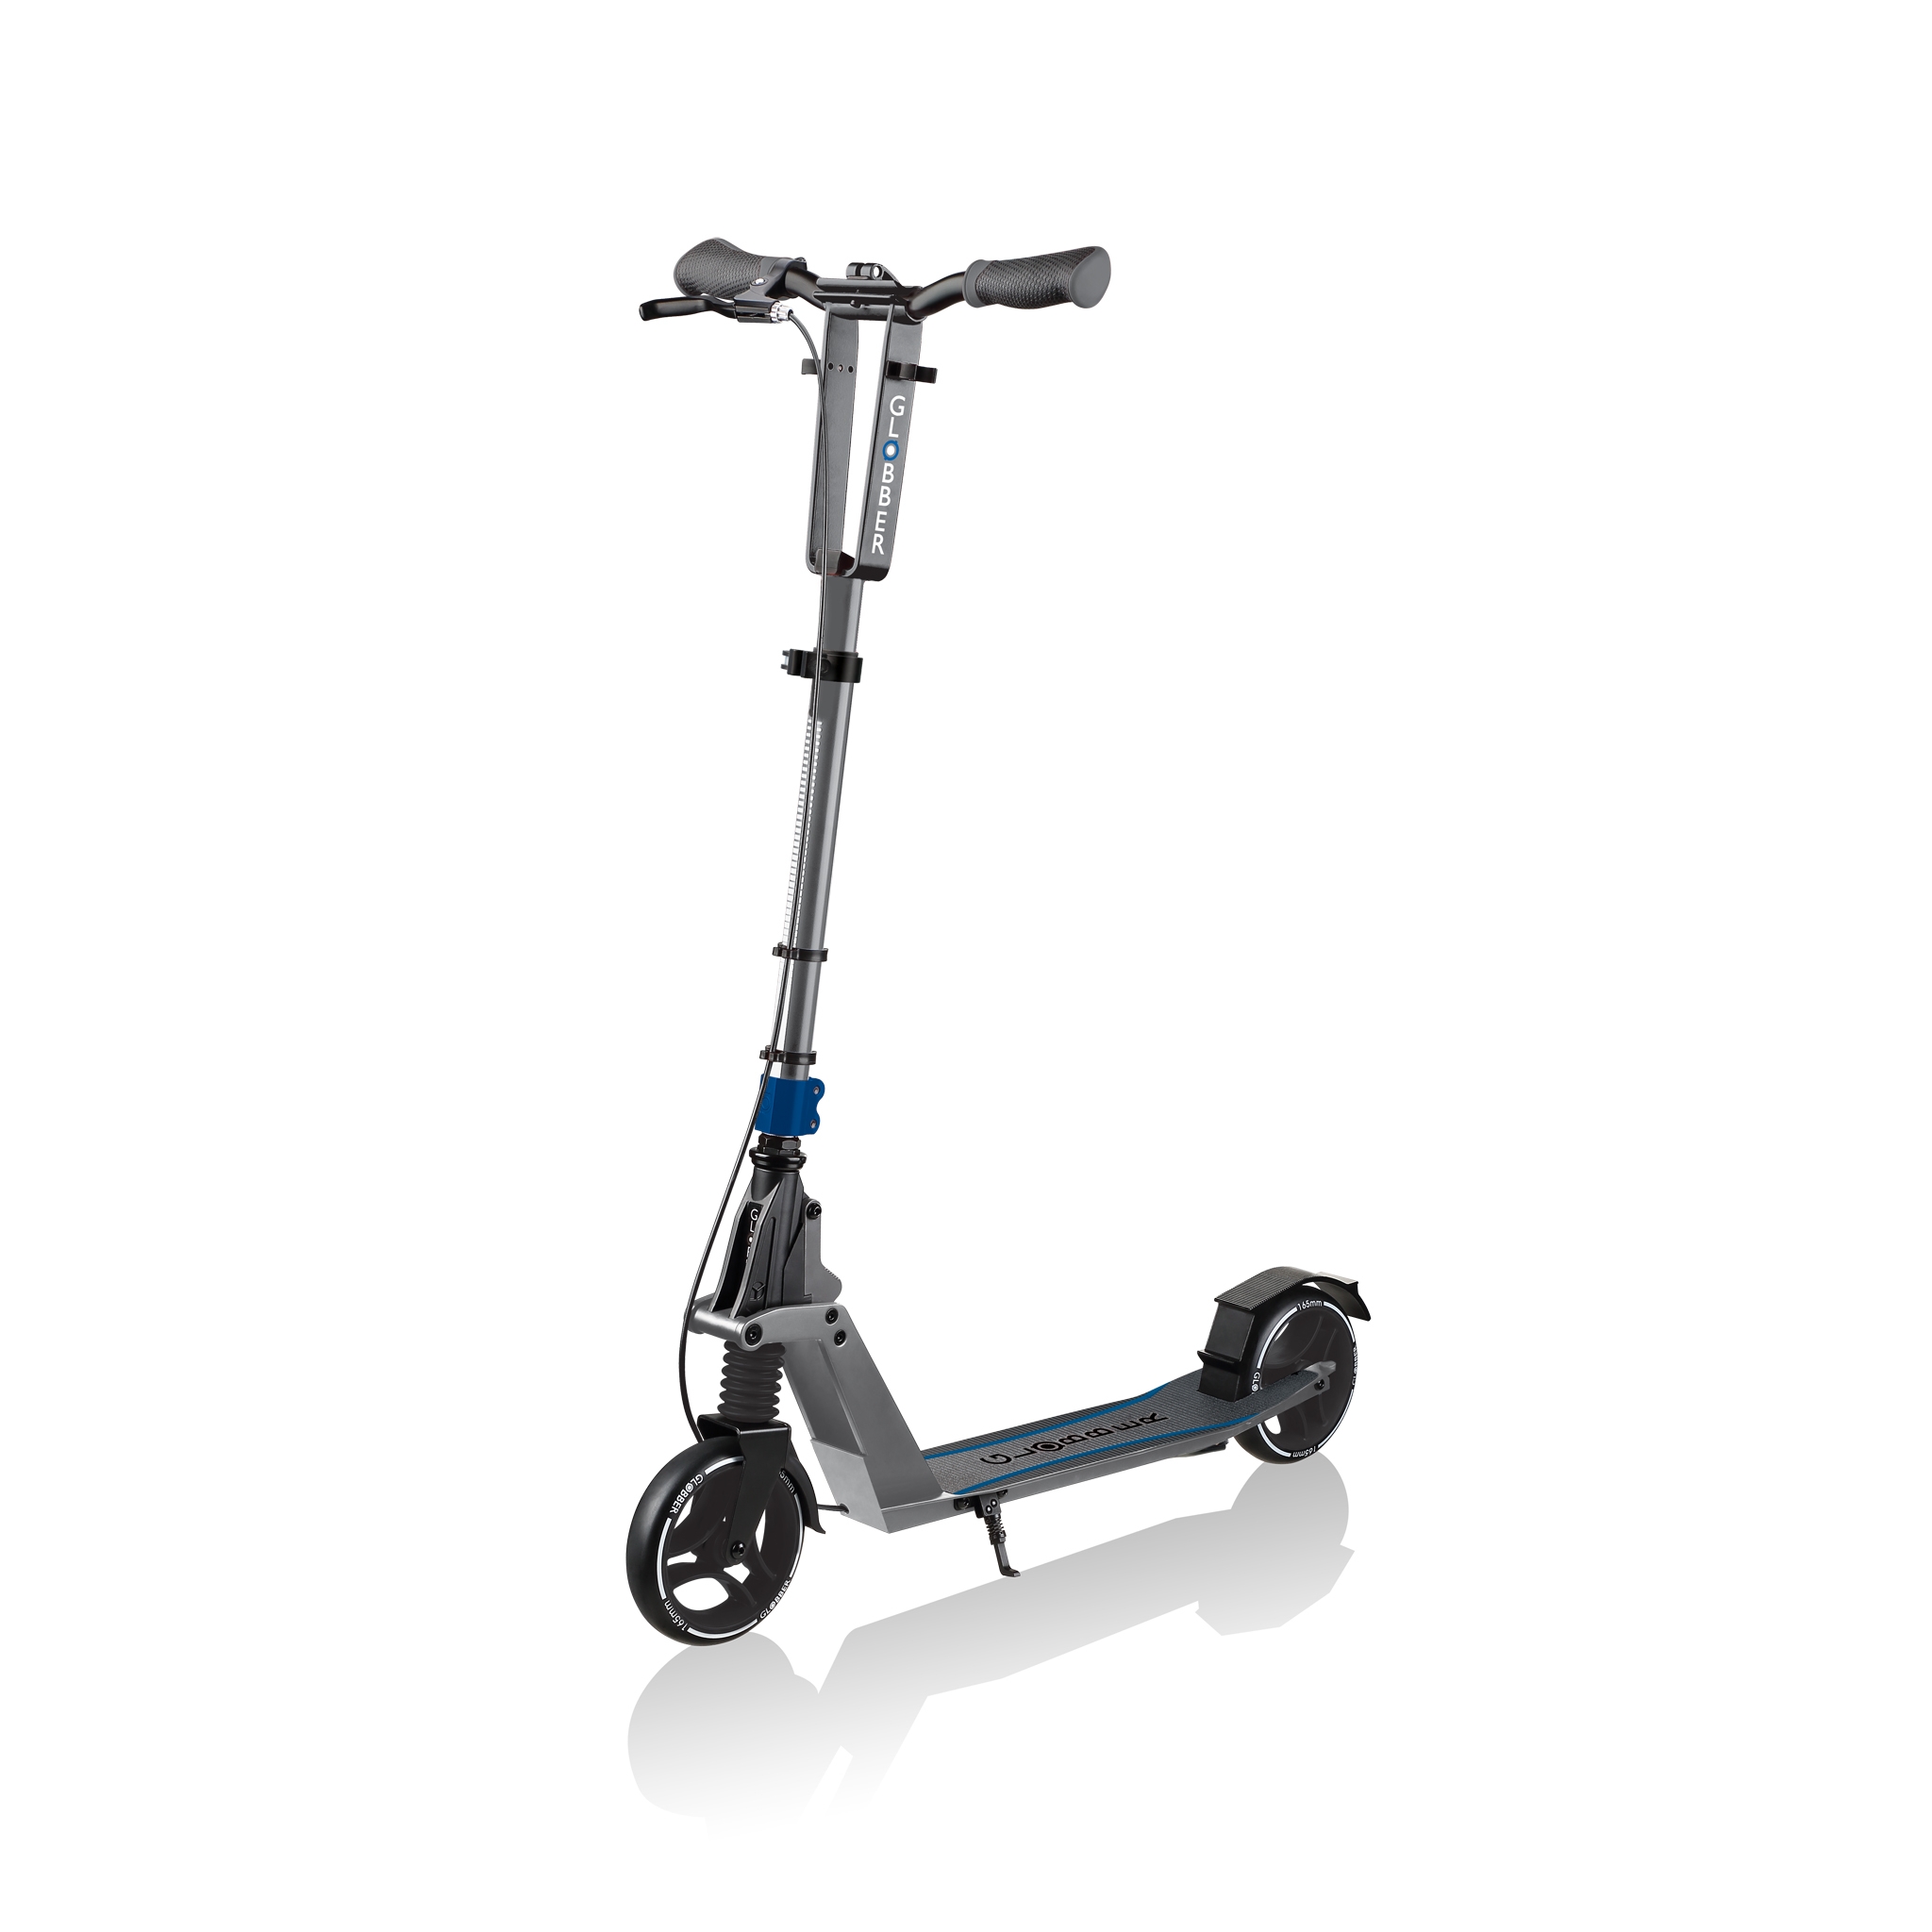 ONE-K-165-BR-award-winning-2-wheel-foldable-scooter-for-teens-and-adults-aged-14-and-above_black-blue 0